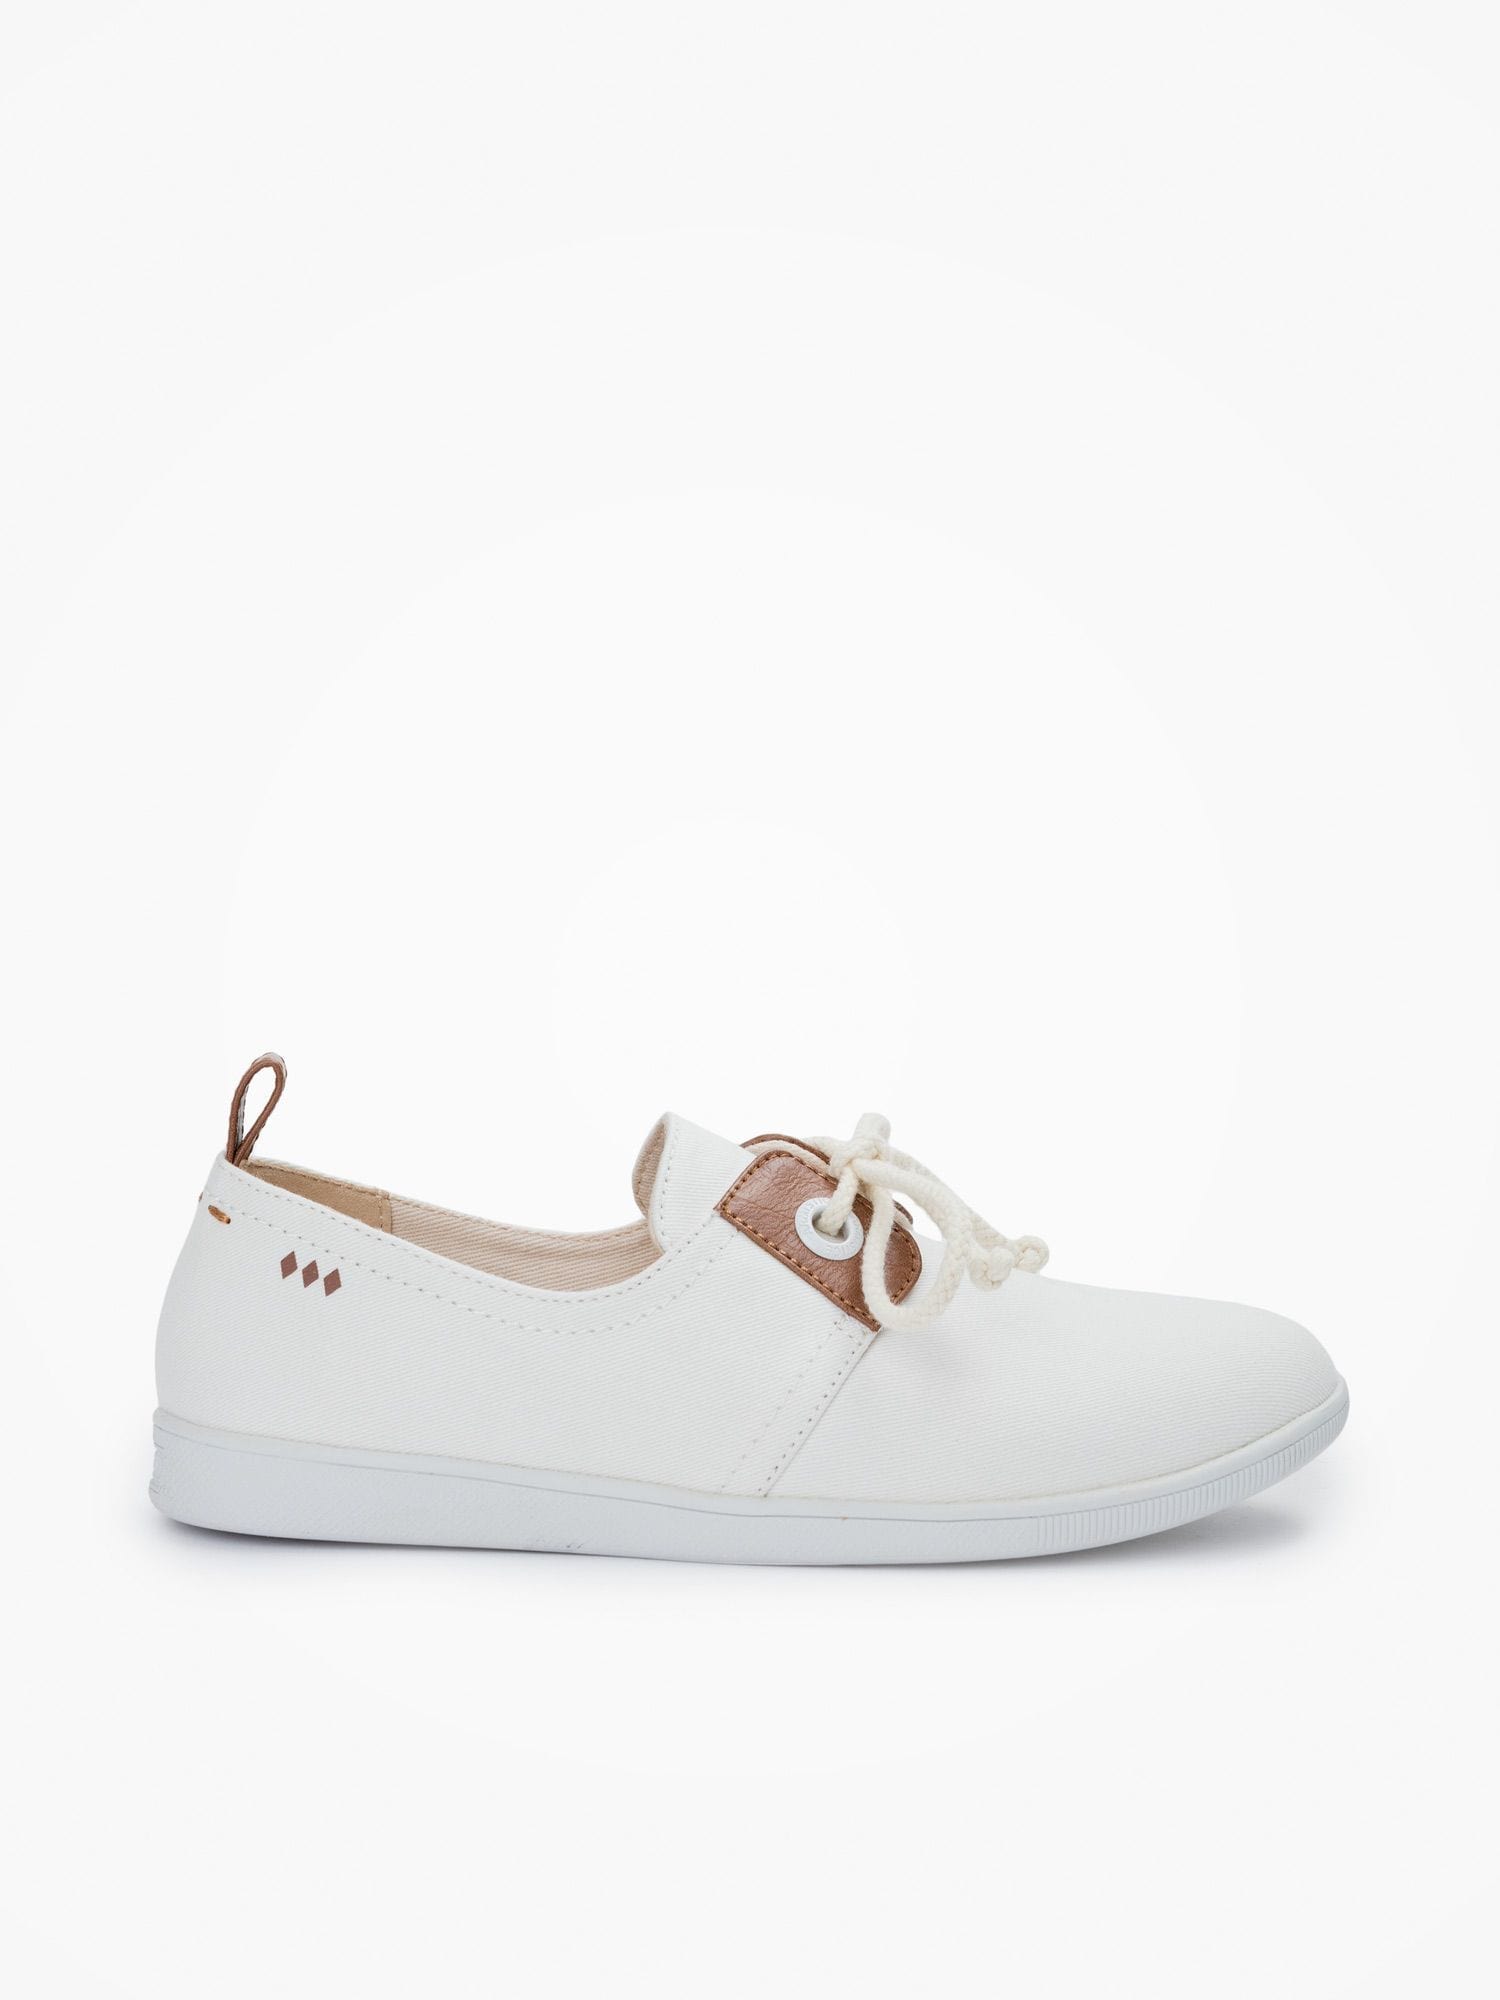 This minimalist Made-in-France sneaker comes packed with neo-retro style which complements beautifully its nautical inspiration with oversized golden eyelets and leather yokes. Is available in different colours, here in white. 